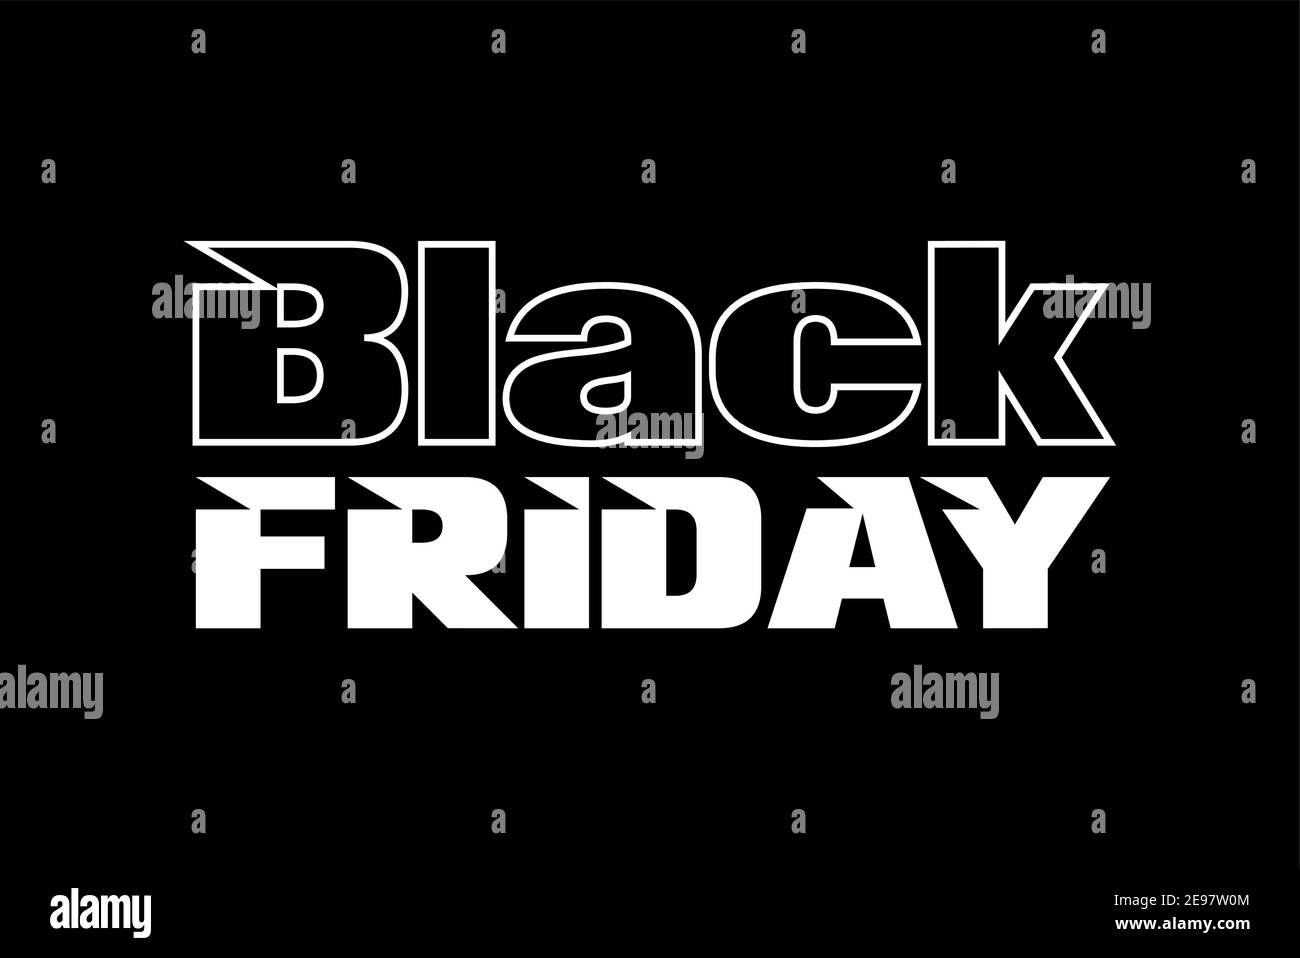 Black Friday banner design for advertising, banners, leaflets and flyers vector illustration isolated Stock Vector